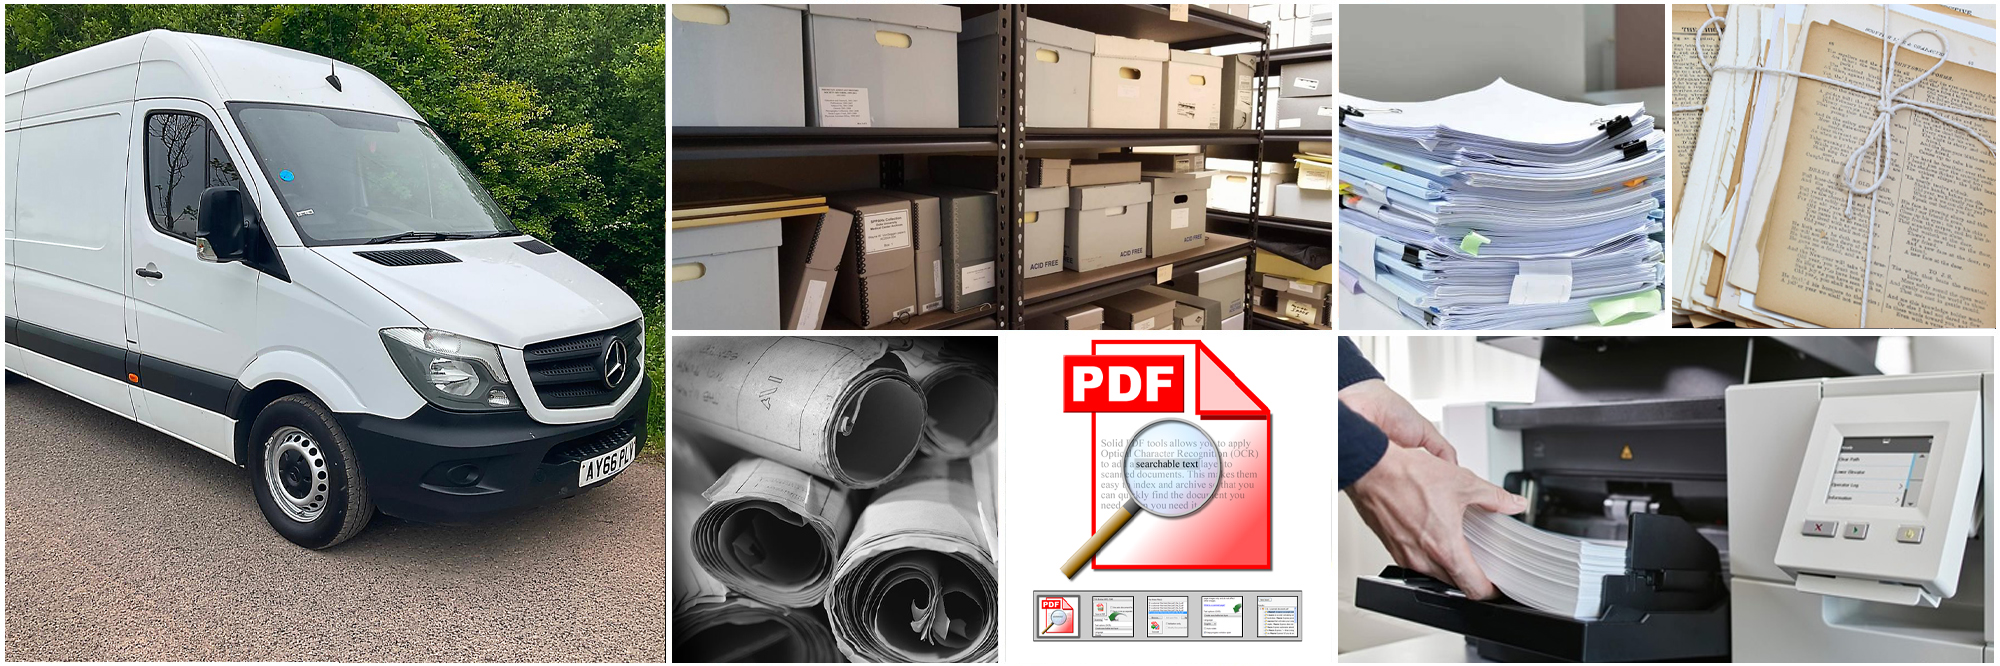 document scanning services in oxford uk